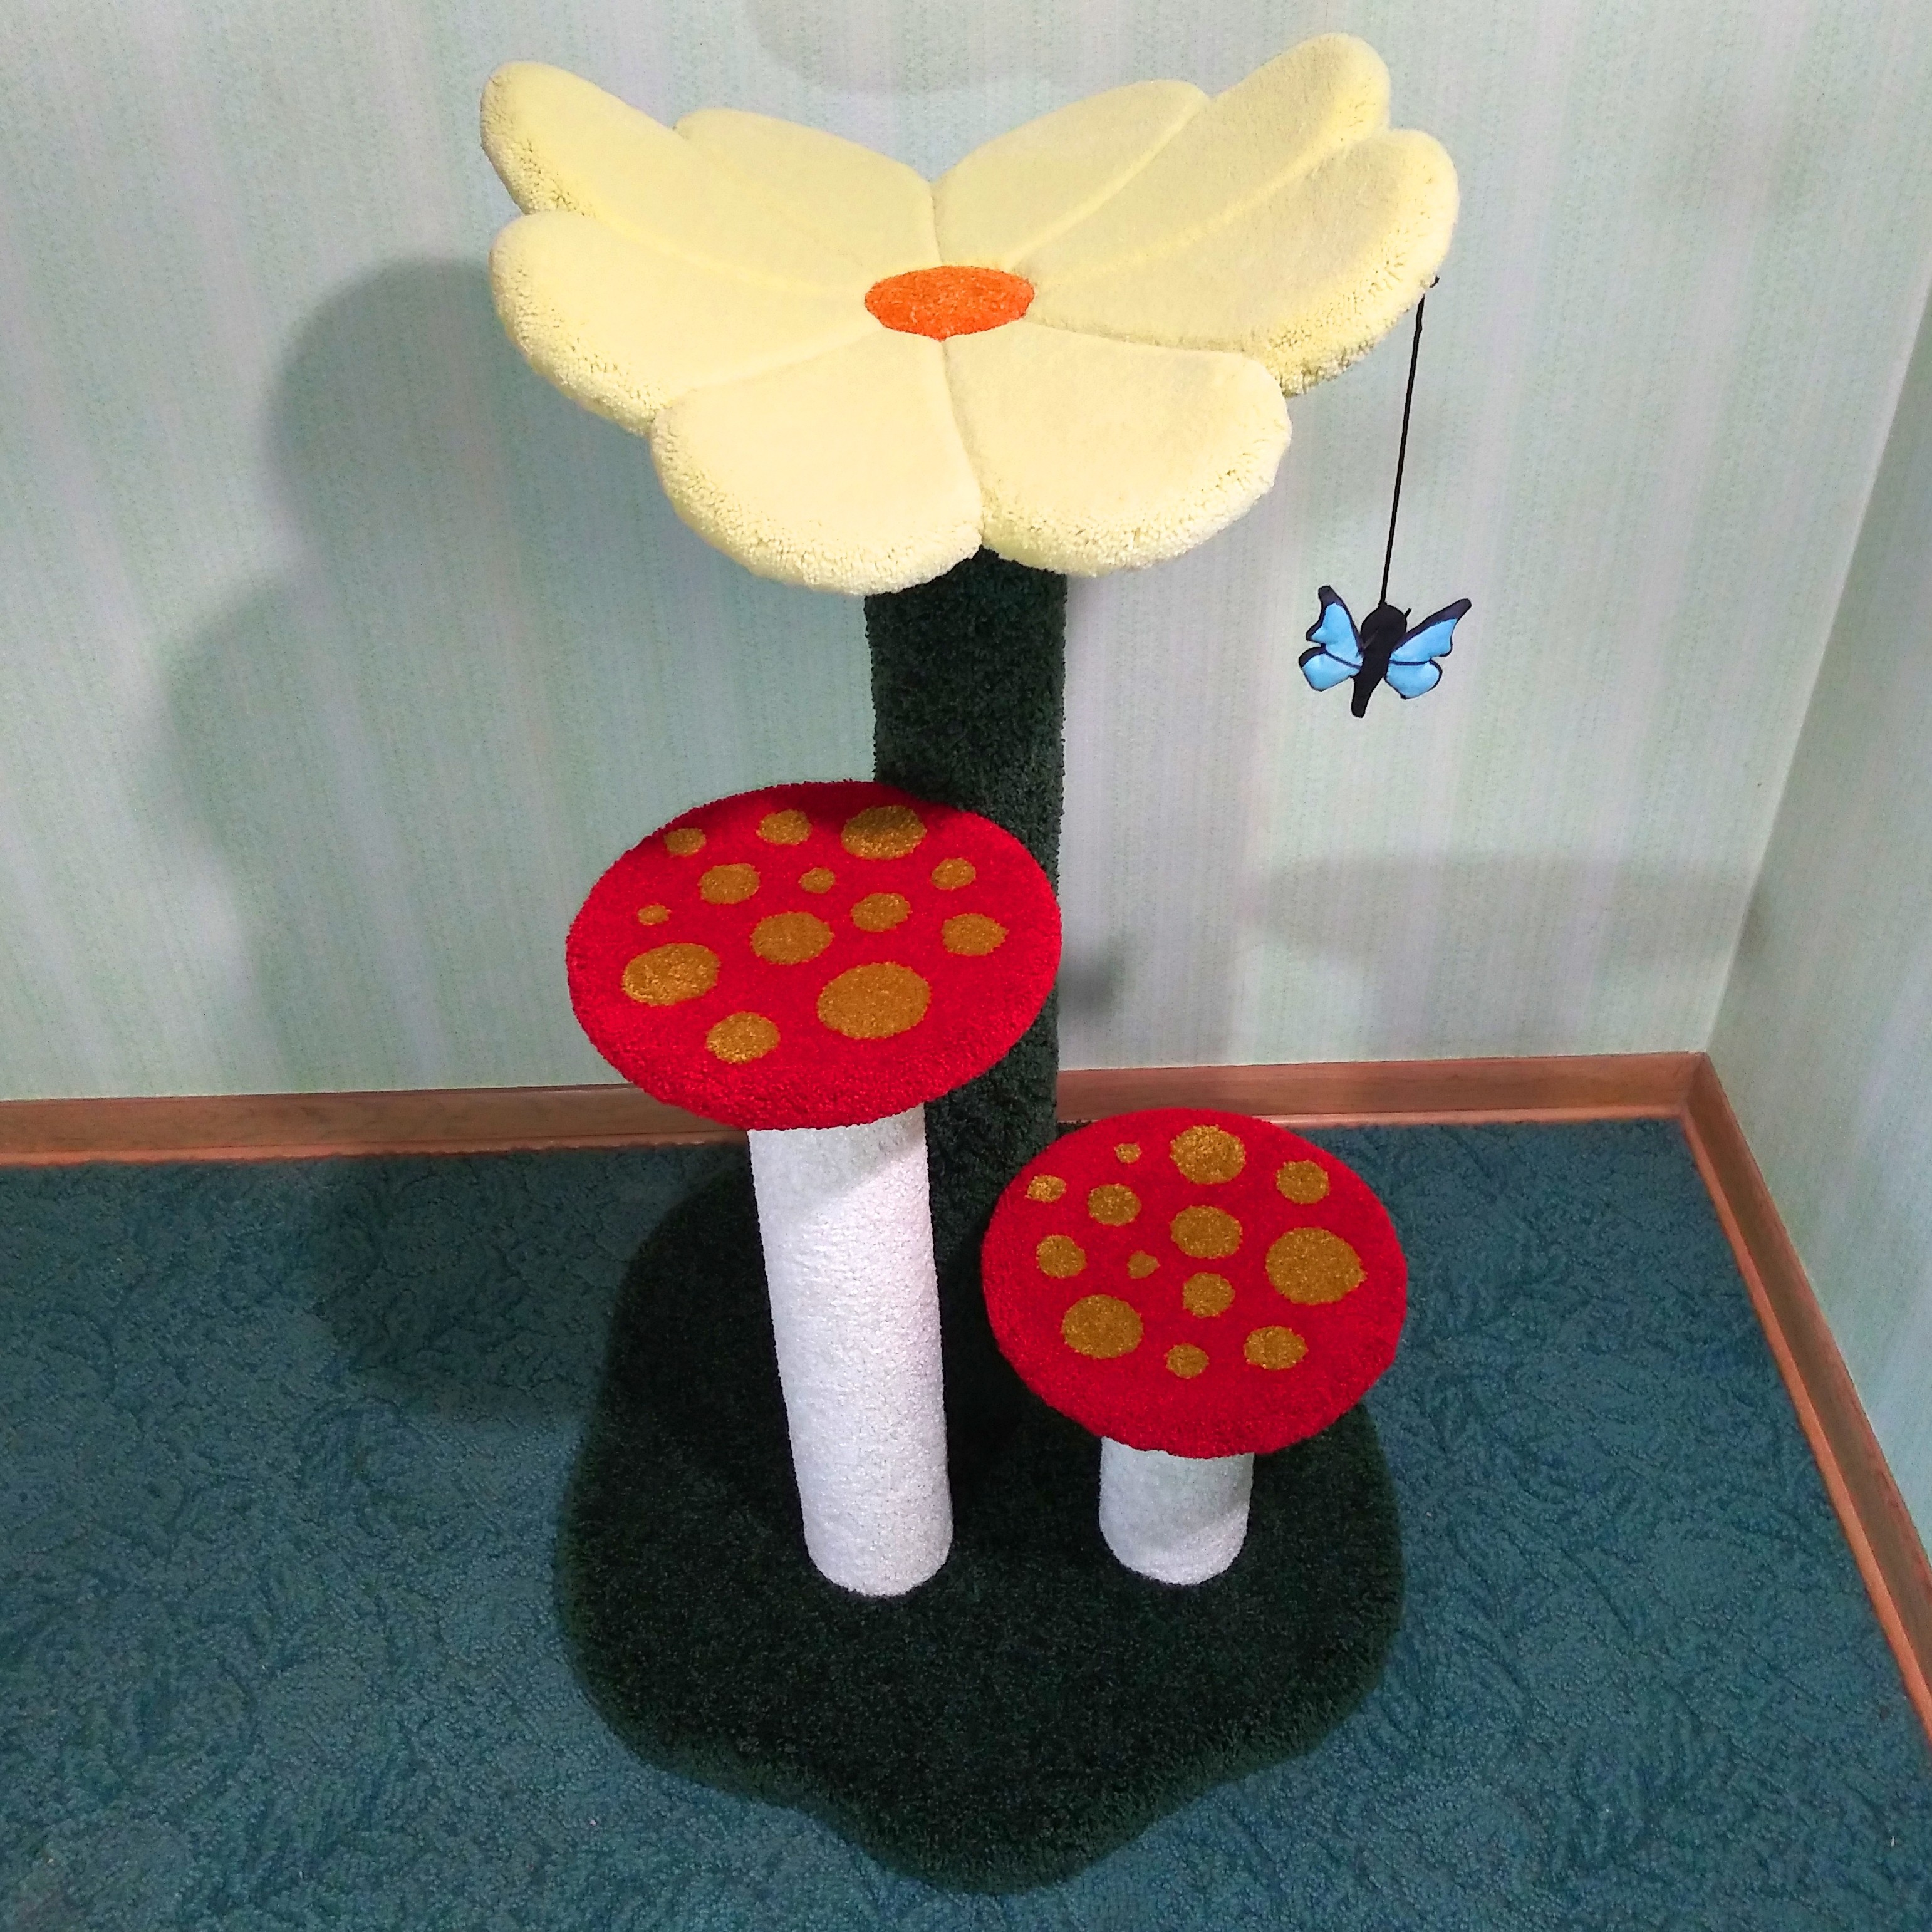 Shown here with pastel yellow flower, forest green base/rear post, white mushroom stems (no sisal), and red mushrooms with gold spots.  Butterfly toy: Copyright CrazyAboutCatnip - https://www.etsy.com/shop/crazyaboutcatnip